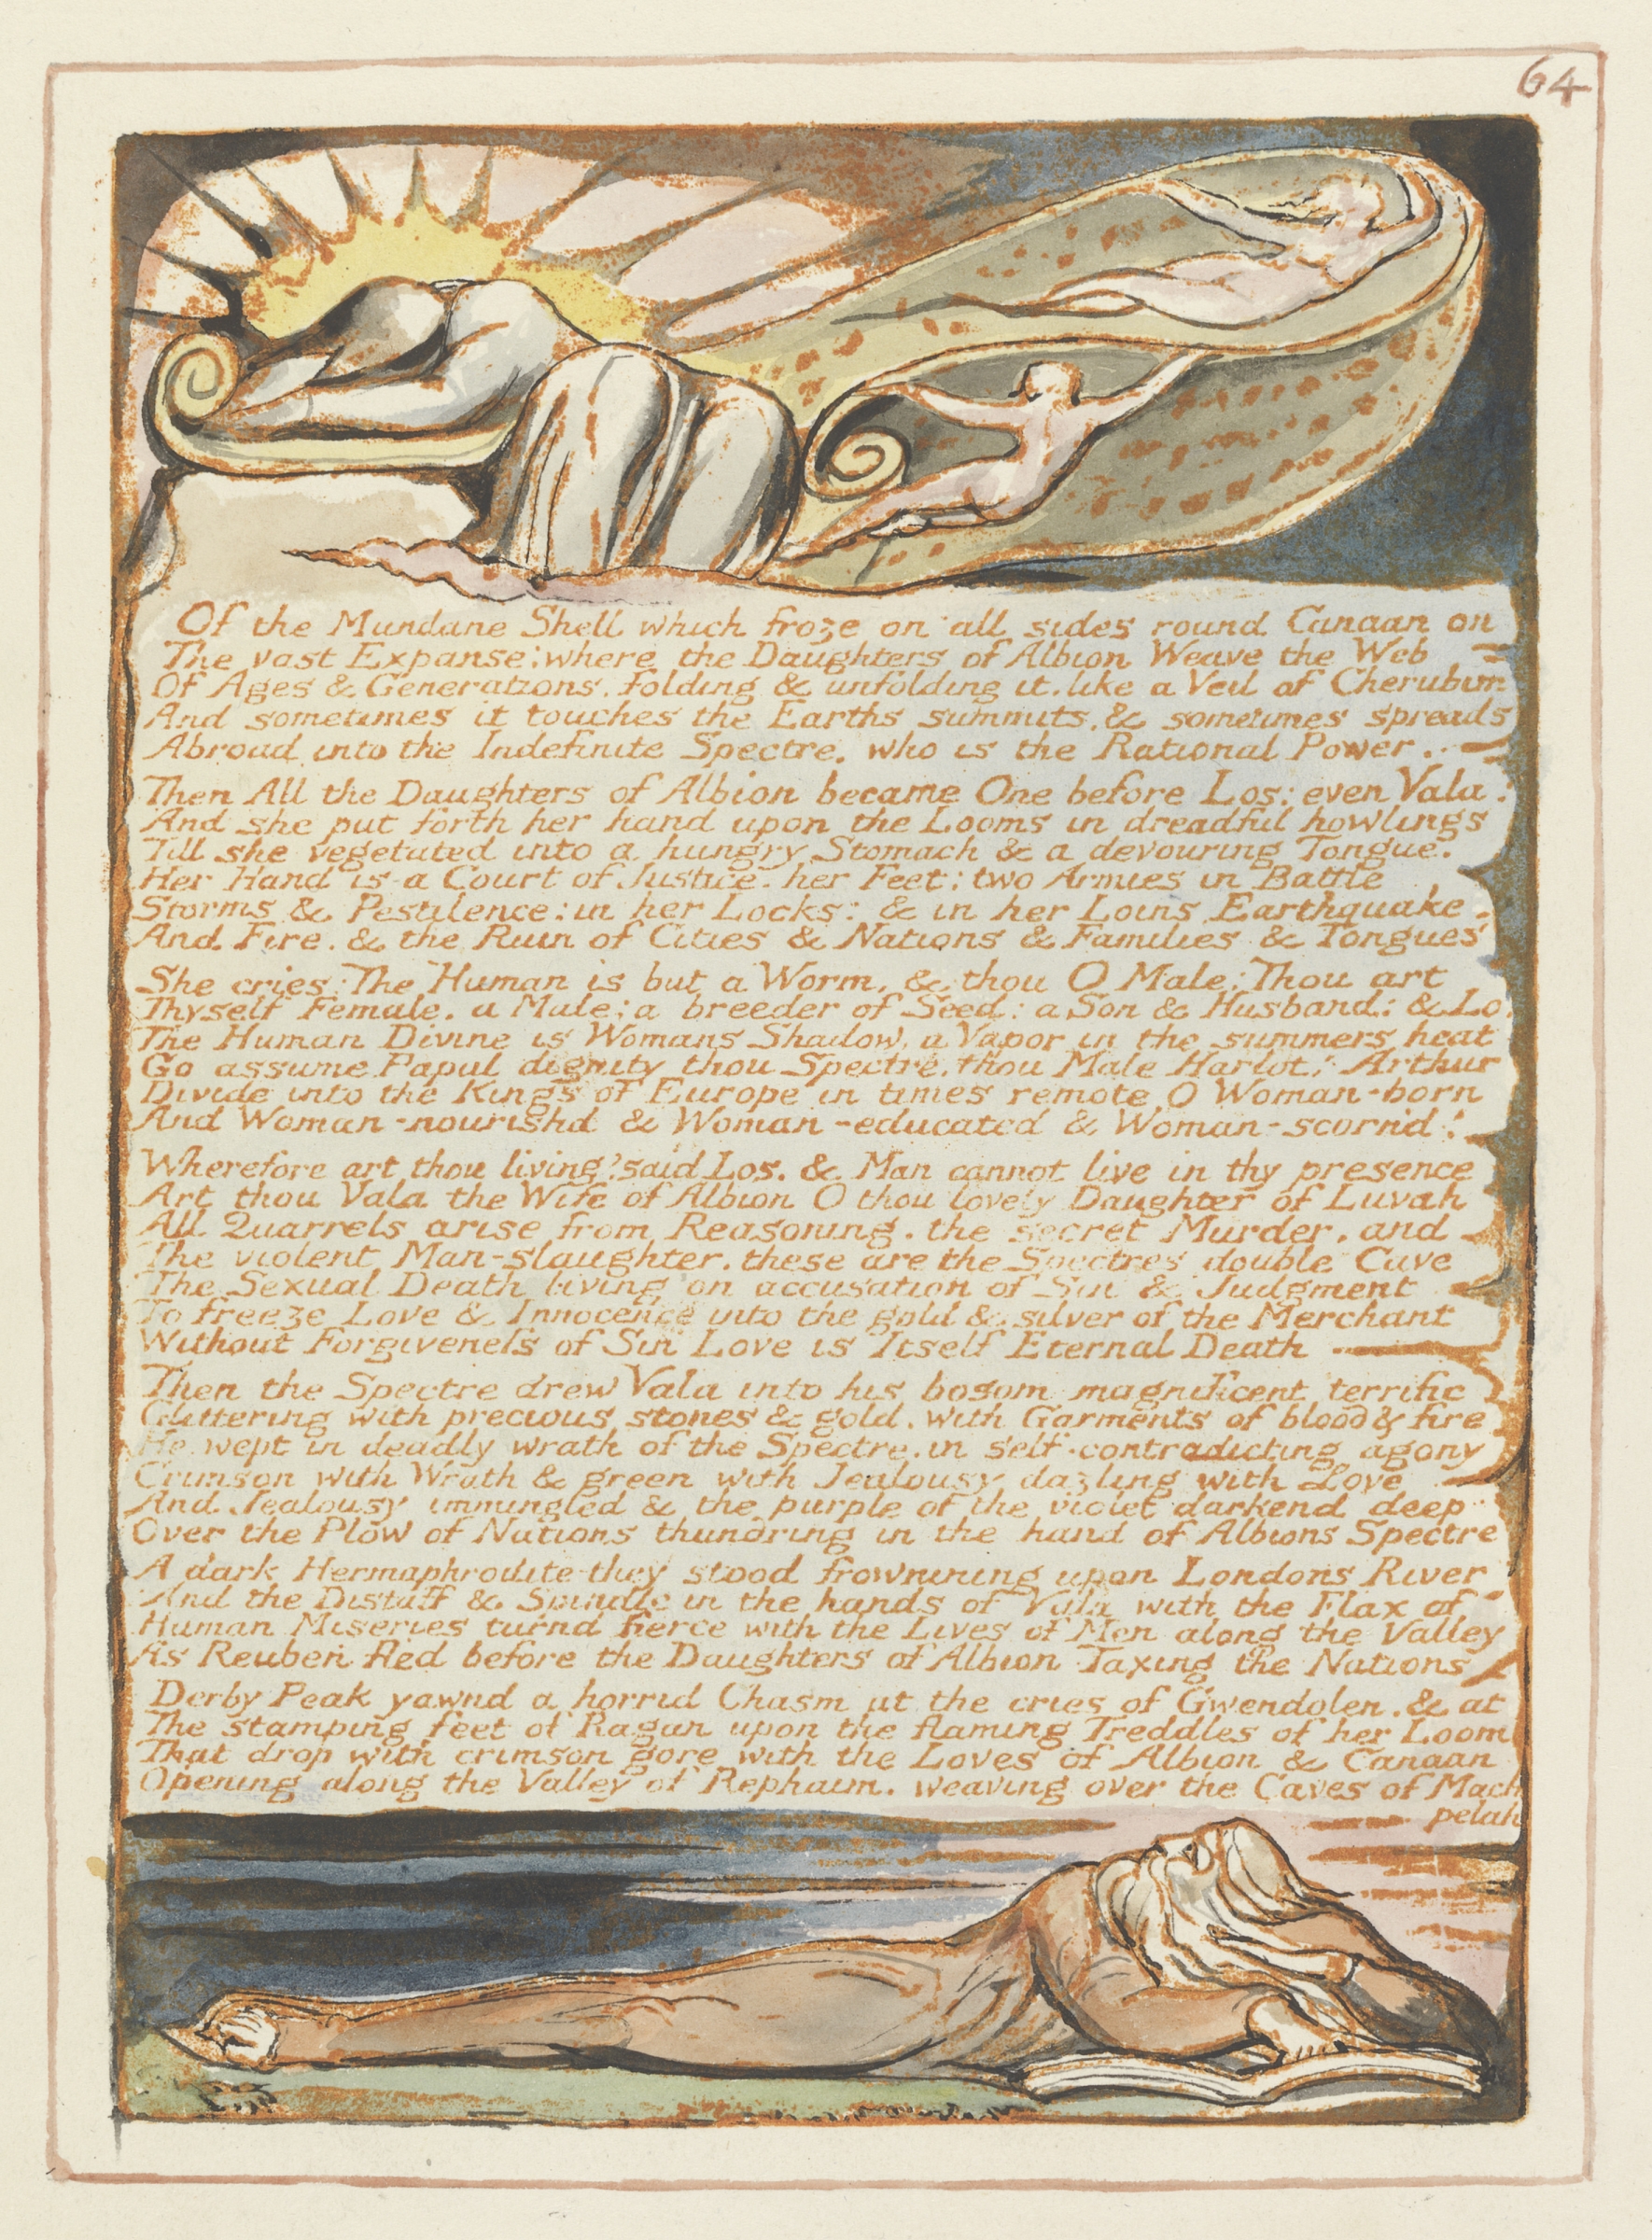 William Blake
Jerusalem, Plate 64, &amp;ldquo;Of the Mundane Shell...&amp;rdquo;, 1804&amp;nbsp;&amp;ndash;&amp;nbsp;1820
relief etching printed in orange with pen and black ink and watercolor on moderately thick, smooth, cream wove paper
Sheet: 13 1/2 x 10 3/8 inches (34.3 x 26.4 cm)&amp;nbsp;
Plate: 8 x 5 3/4 inches (20.3 x 14.6 cm)
Yale Center for British Art, Paul Mellon Collection